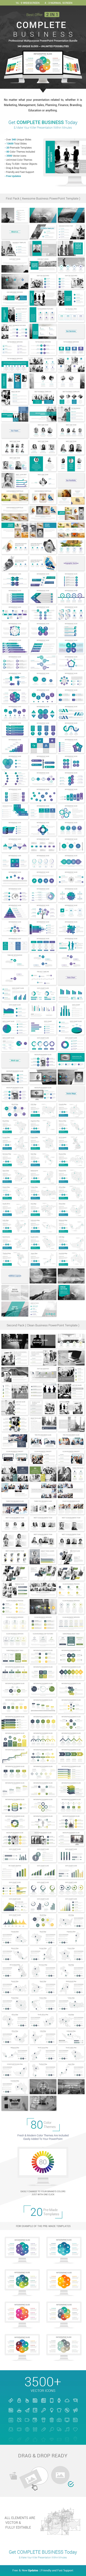 Complete Business - 2 In 1 PowerPoint Presentation Template Bundle